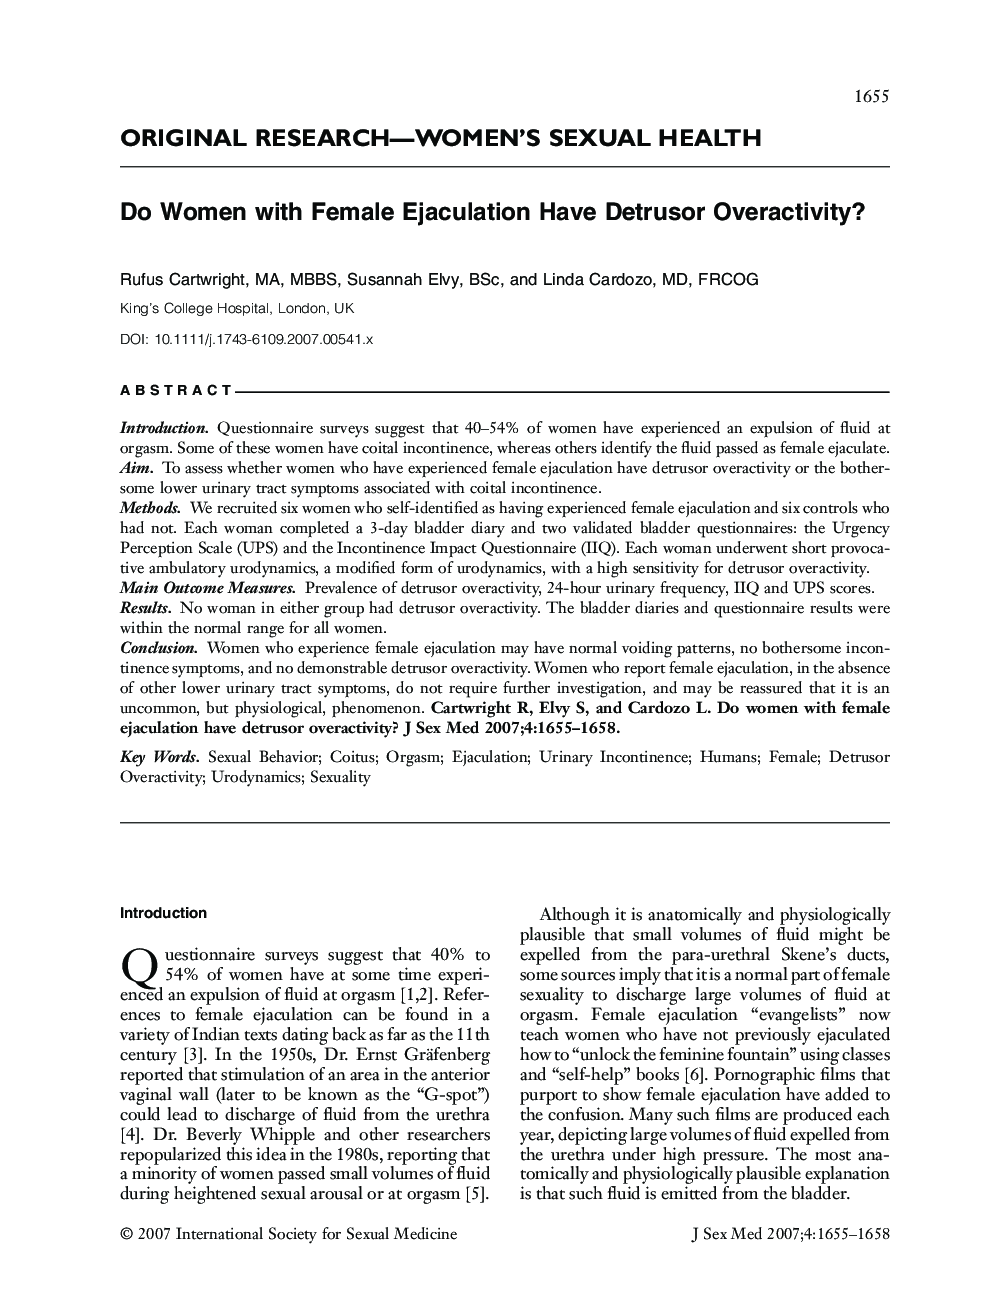 ORIGINAL RESEARCH-WOMEN'S SEXUAL HEALTH: Do Women with Female Ejaculation Have Detrusor Overactivity?